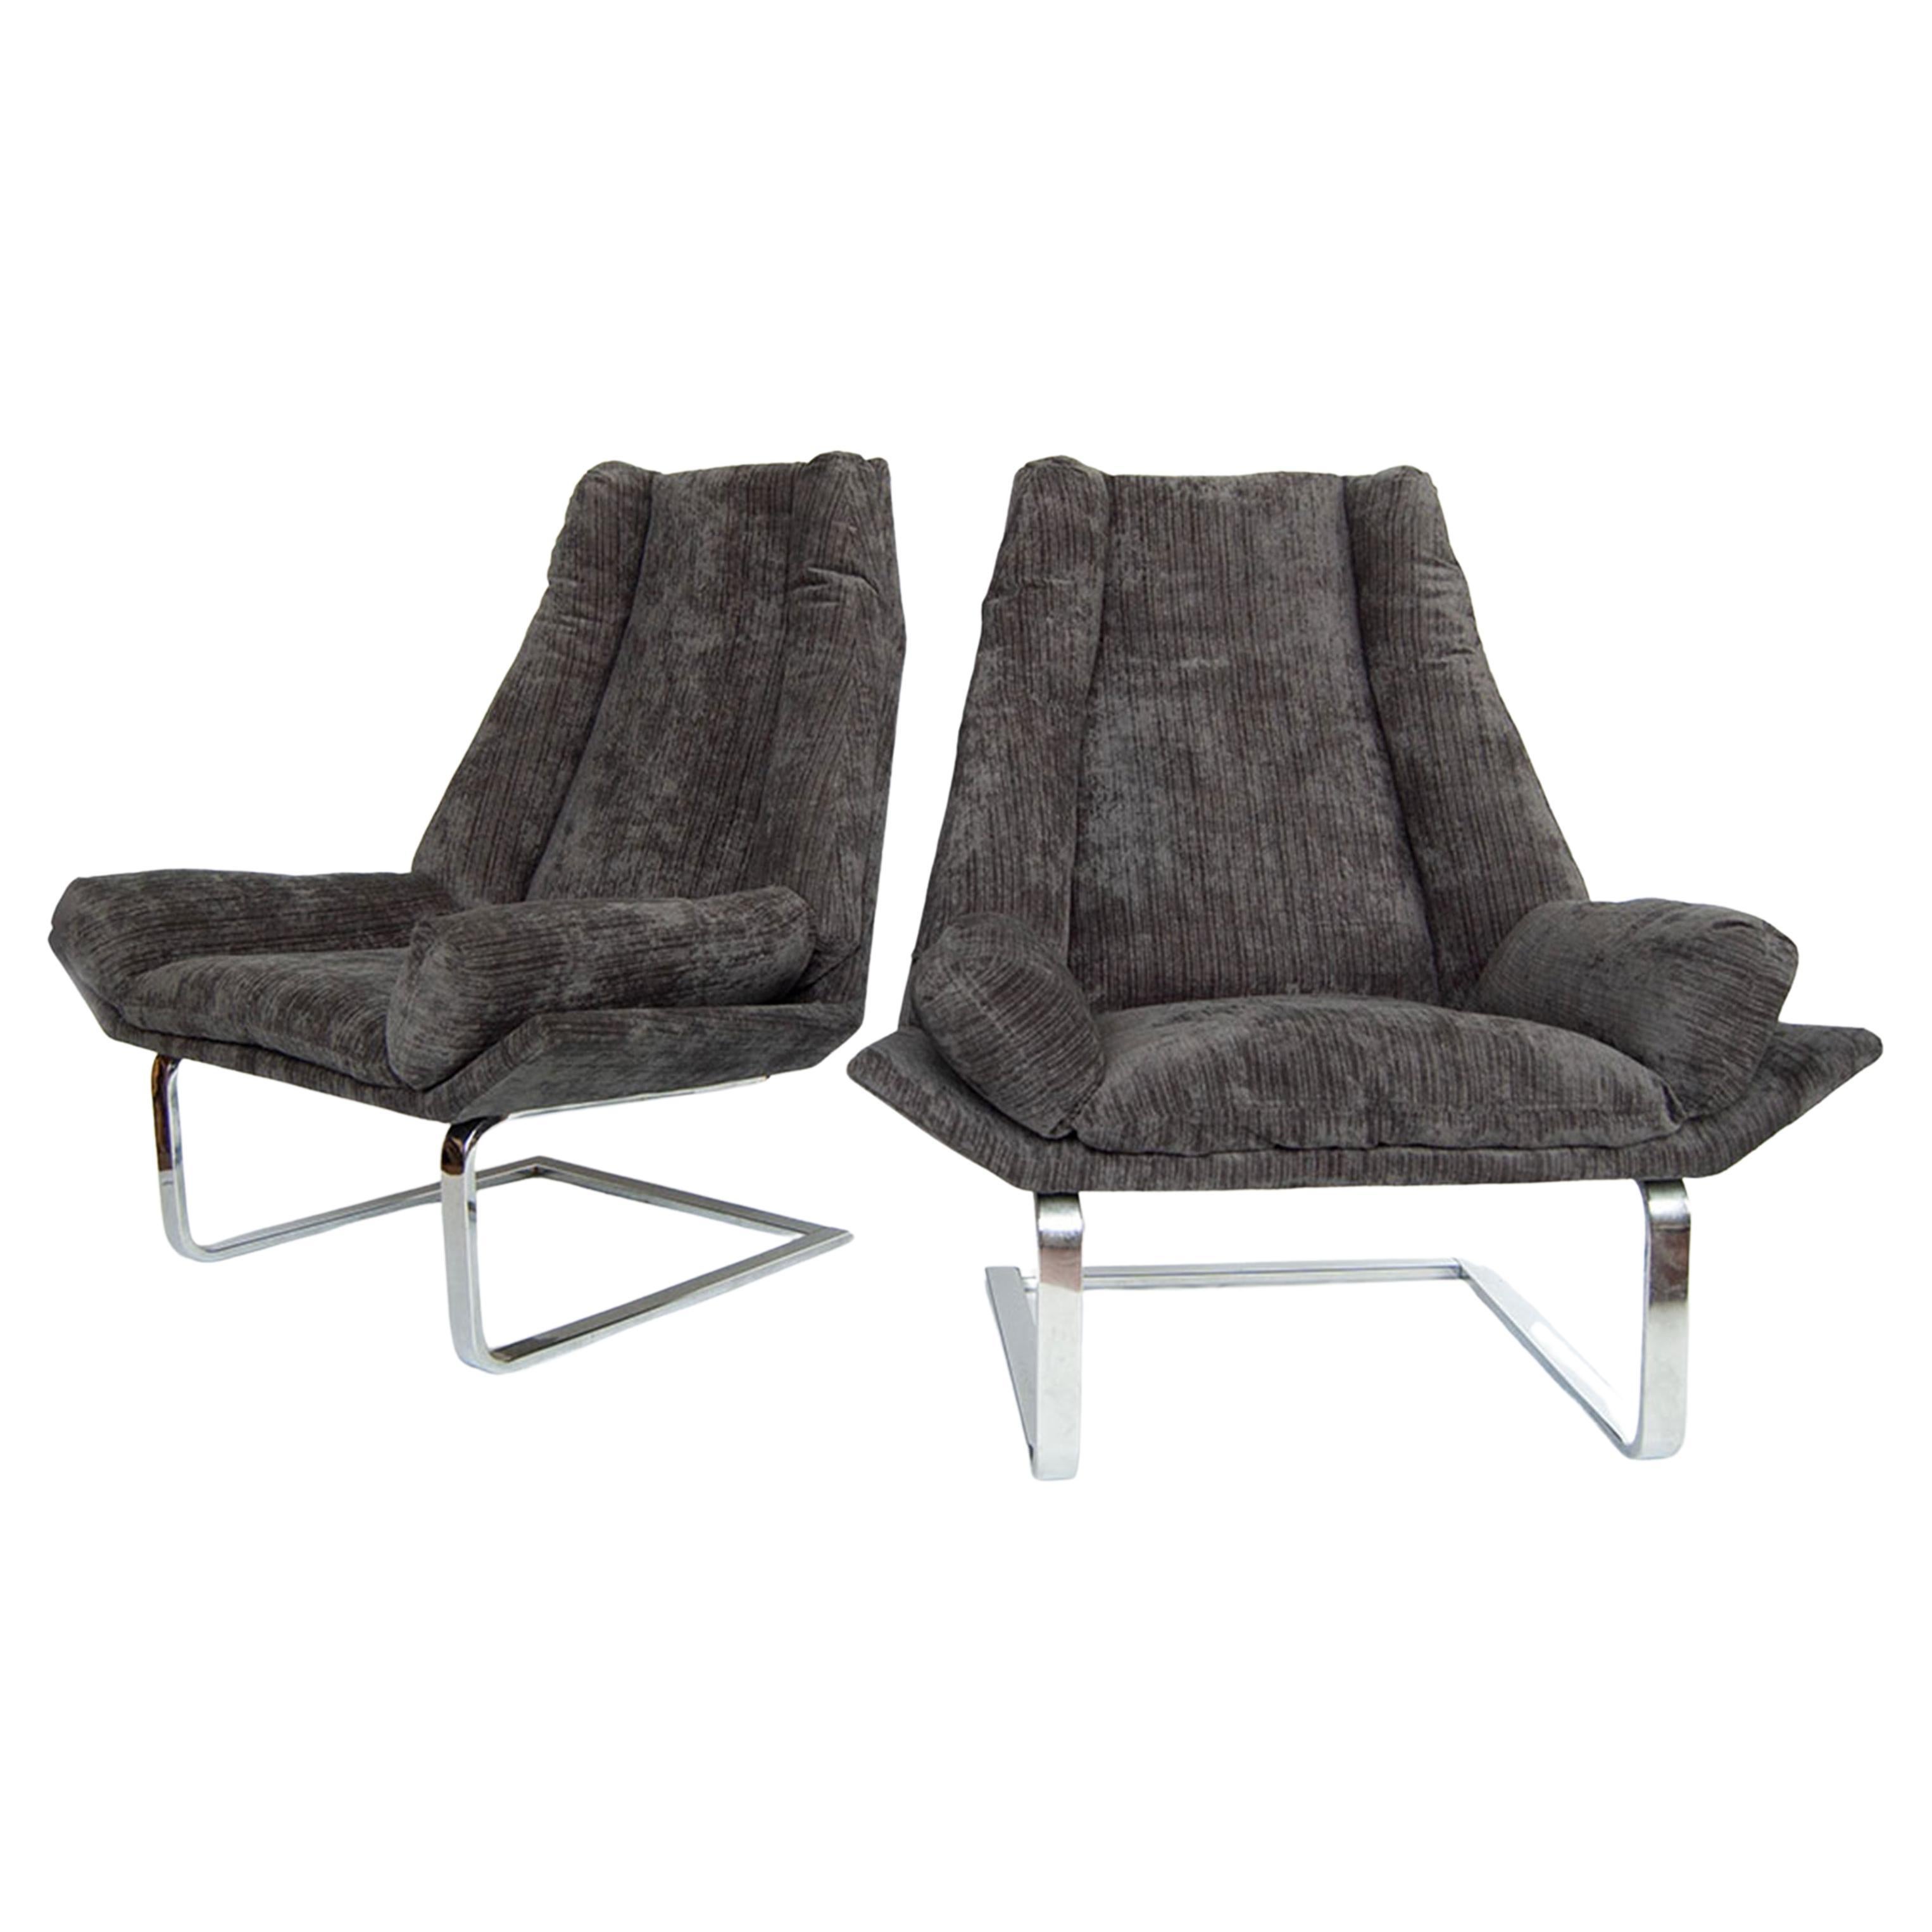 Pair Modern Upholstered Chrome Cantilever Chairs by DIA For Sale